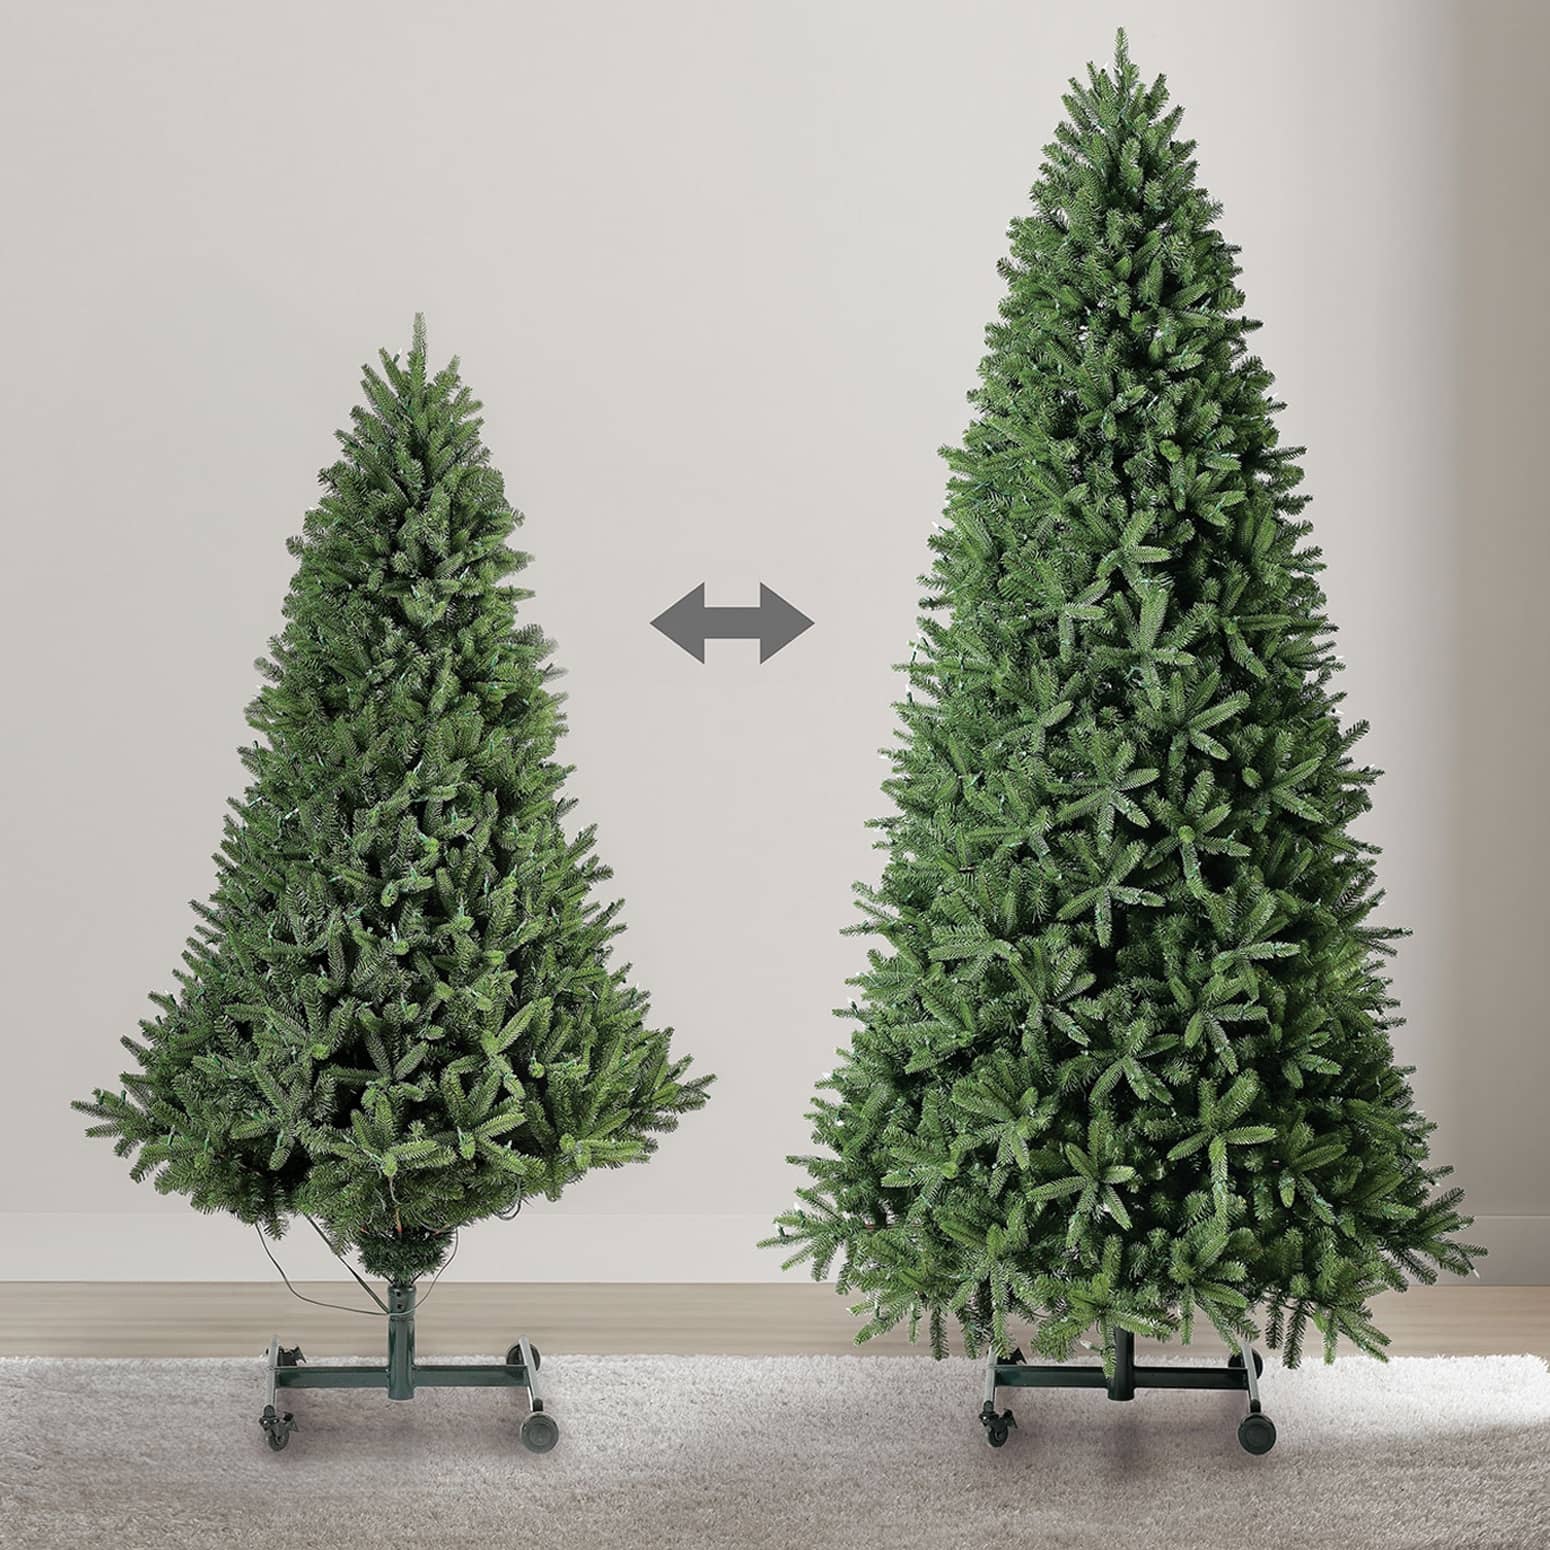 Grow and Stow Christmas Tree - Magically Grows From 7 ft to 9 ft!